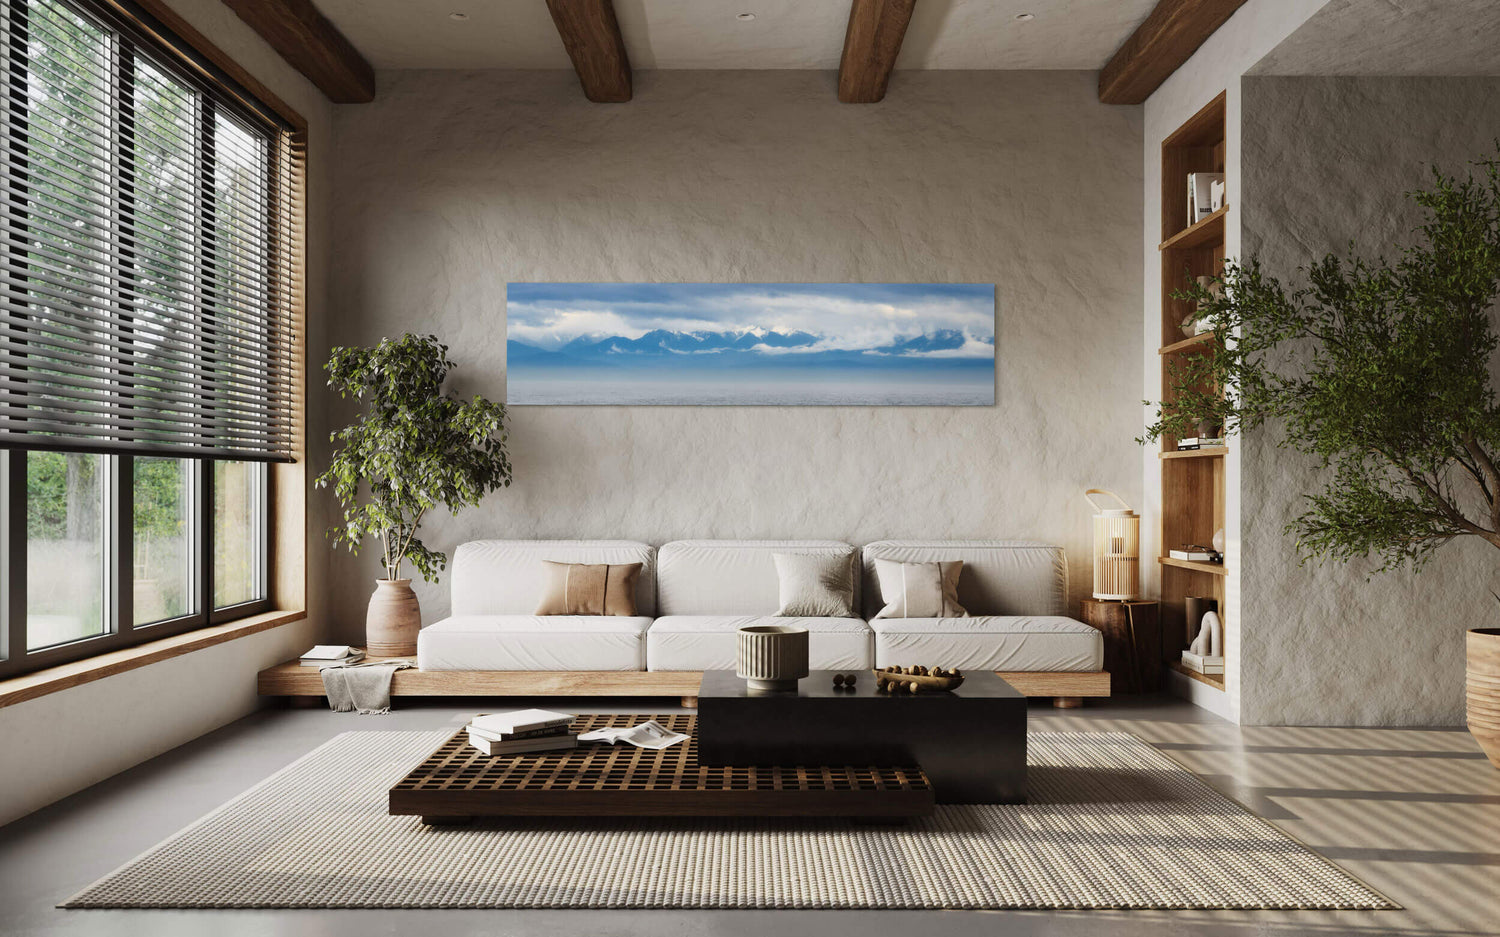 An Olympic Mountains panorama photograph hangs in a living room.